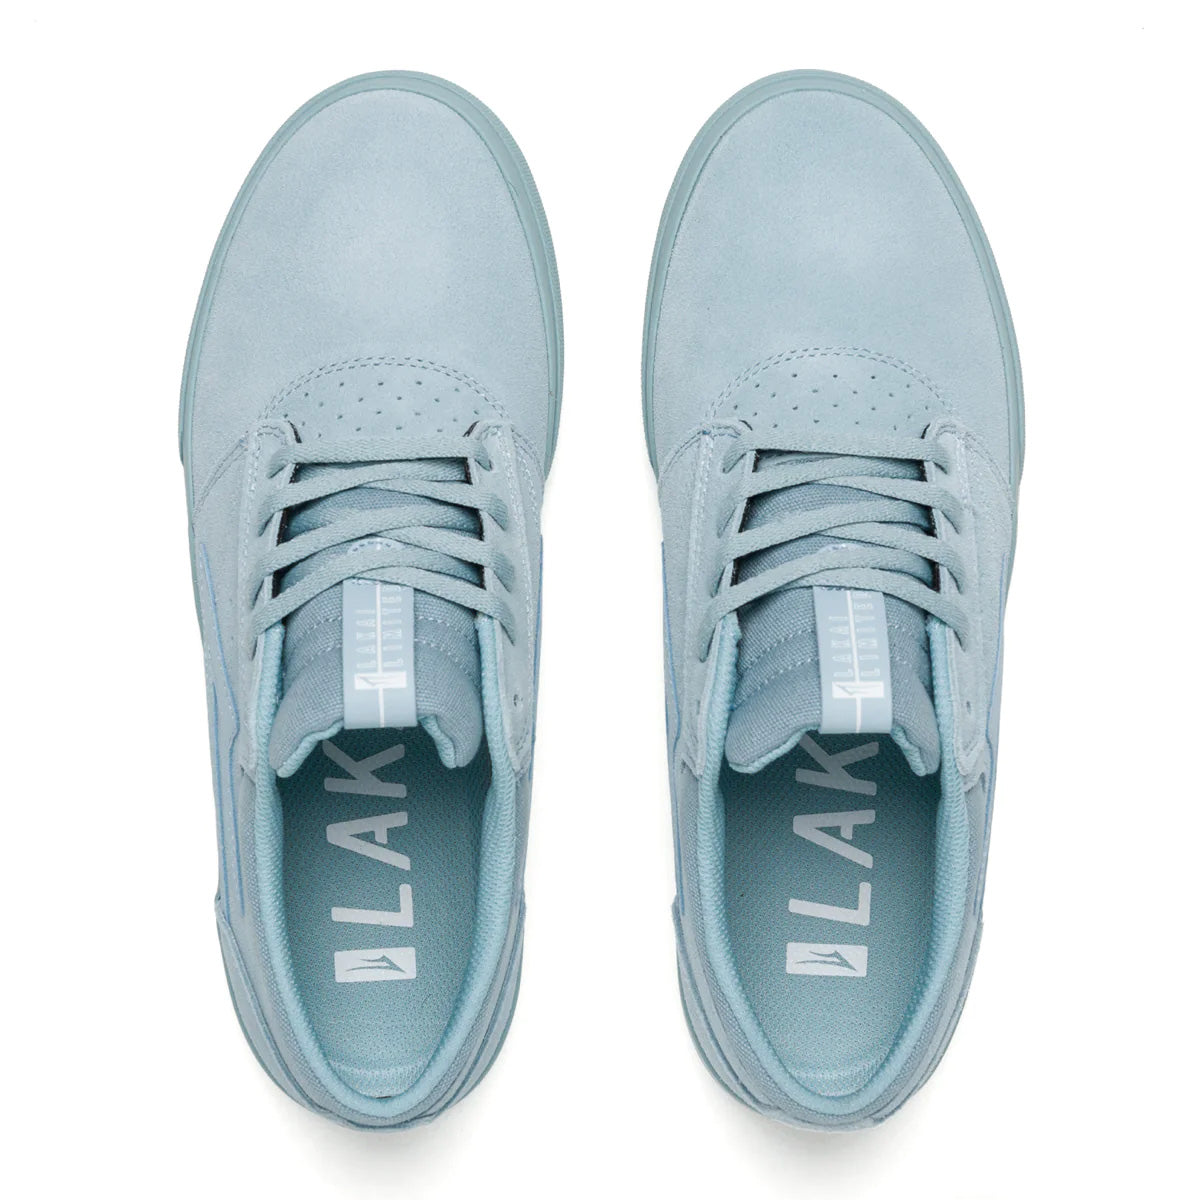 Lakai Griffin Shoes - Muted Blue Suede